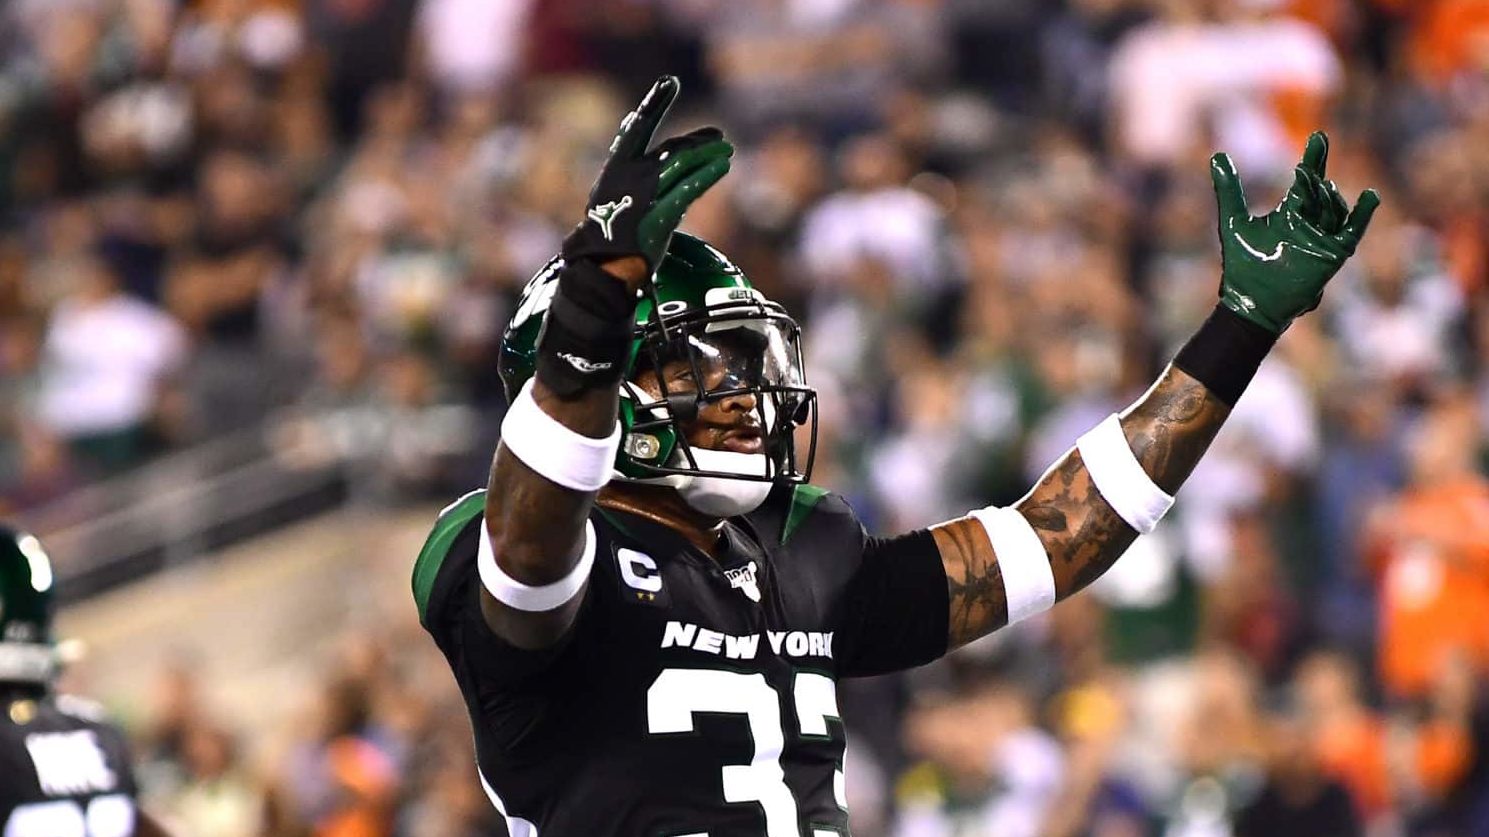 EAST RUTHERFORD, NEW JERSEY - SEPTEMBER 16: Jamal Adams #33 of the New York Jets urges the crowd to cheer during their game against the Cleveland Browns at MetLife Stadium on September 16, 2019 in East Rutherford, New Jersey.